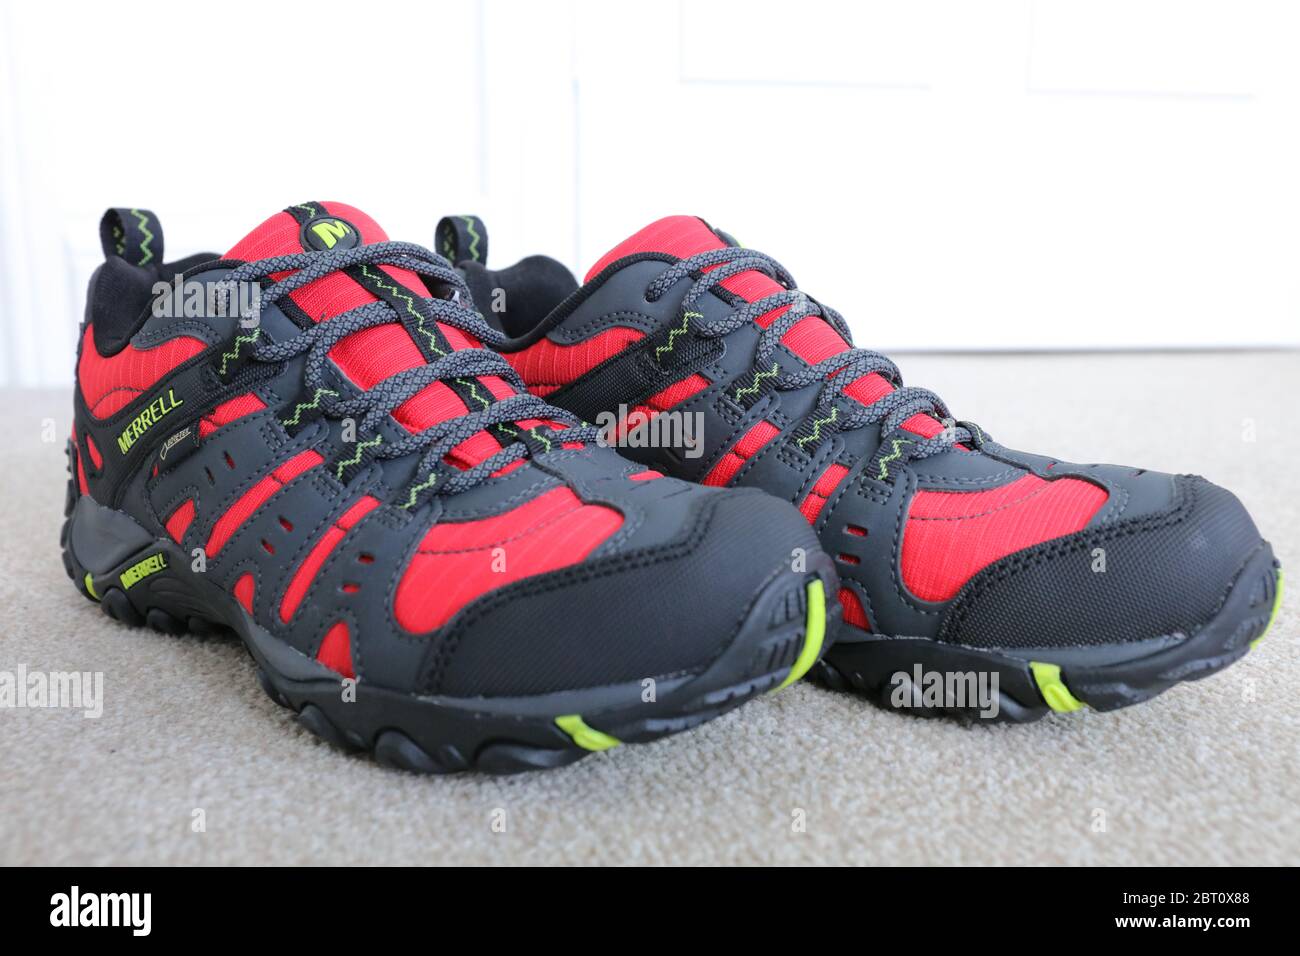 A Pair of a Merrell Red Accentor Sport GORE-TEX Trail Shoes Stock Photo -  Alamy